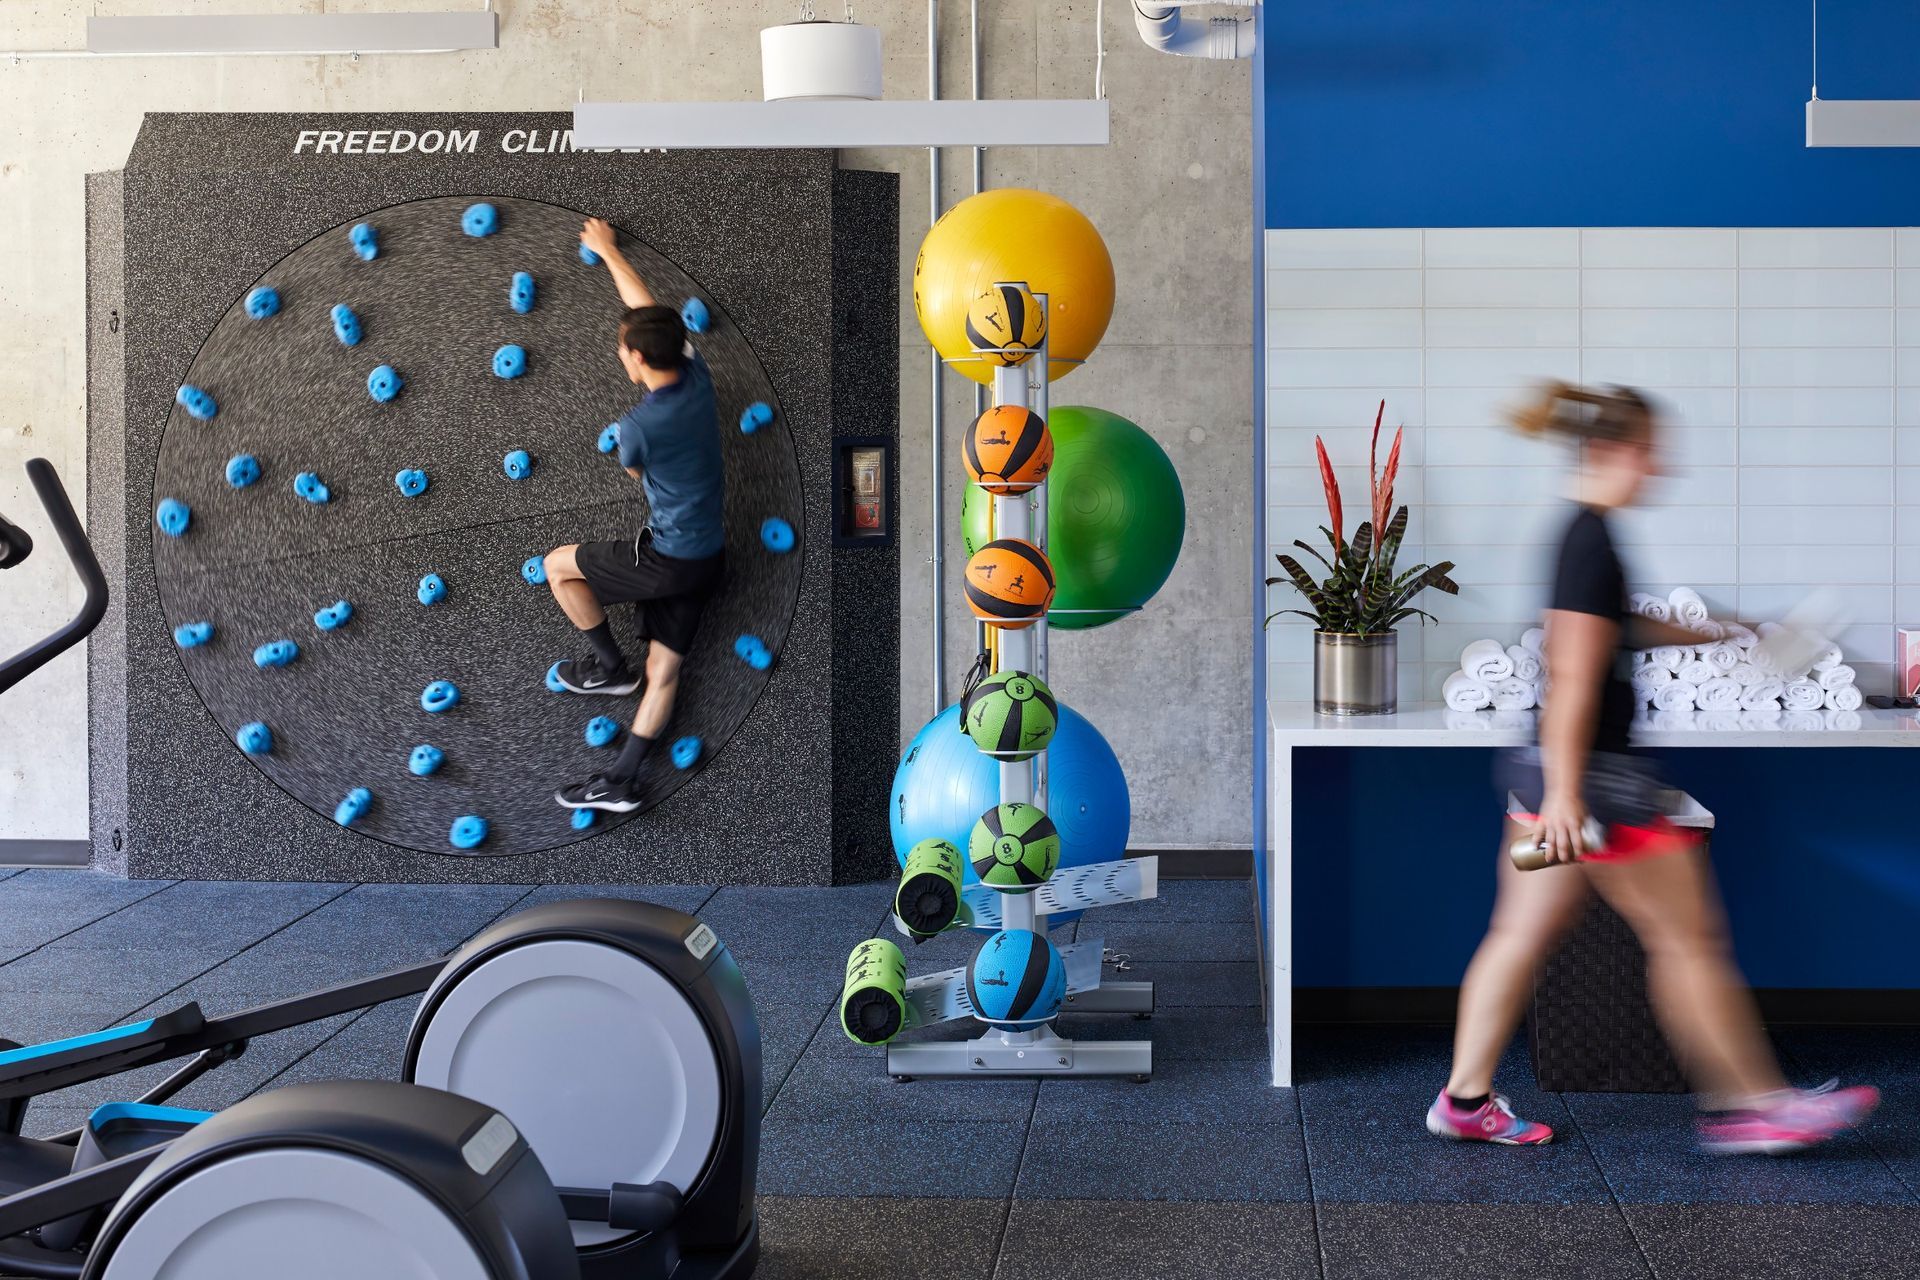 A man is climbing a wall in a gym while a woman walks by.